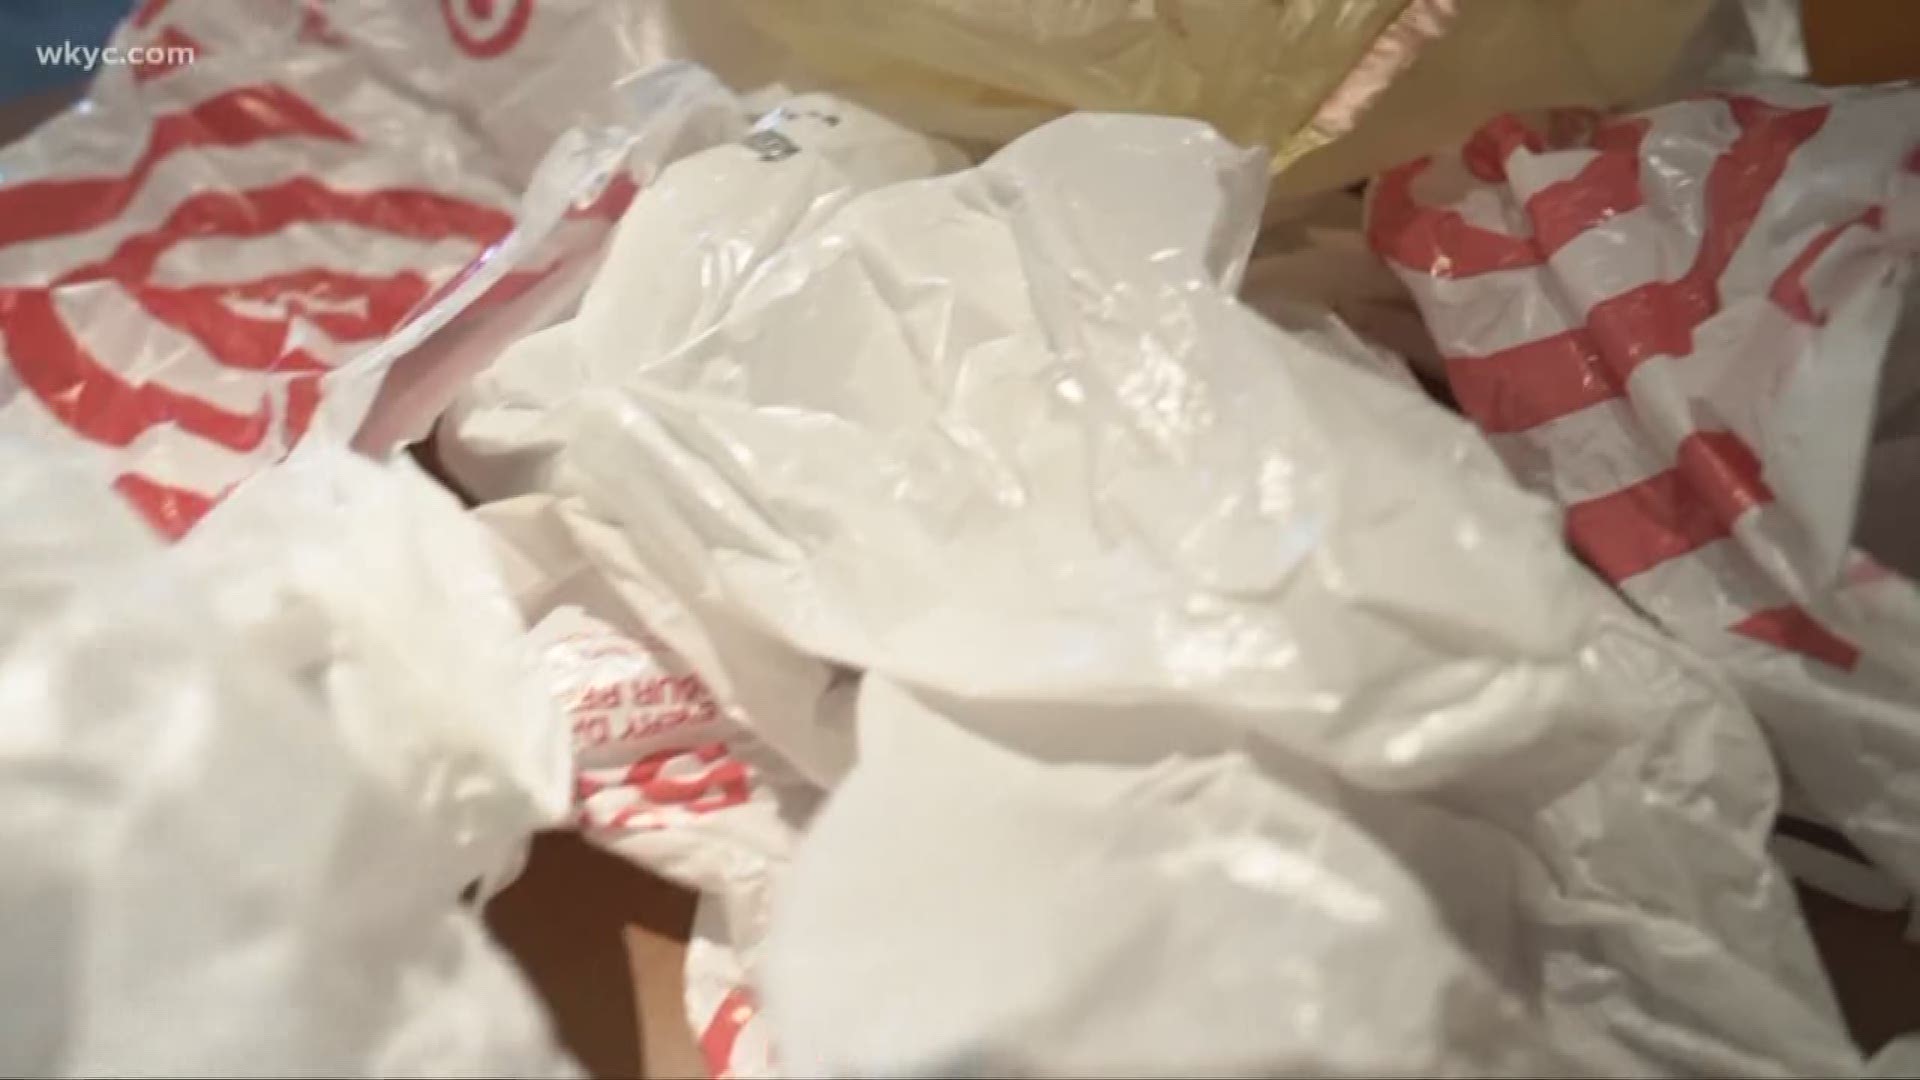 With an 8-3 vote, Cuyahoga County became the first county in the state to pass a ban on plastic bags. Lynna Lai tells us how this will affect you in the coming months.